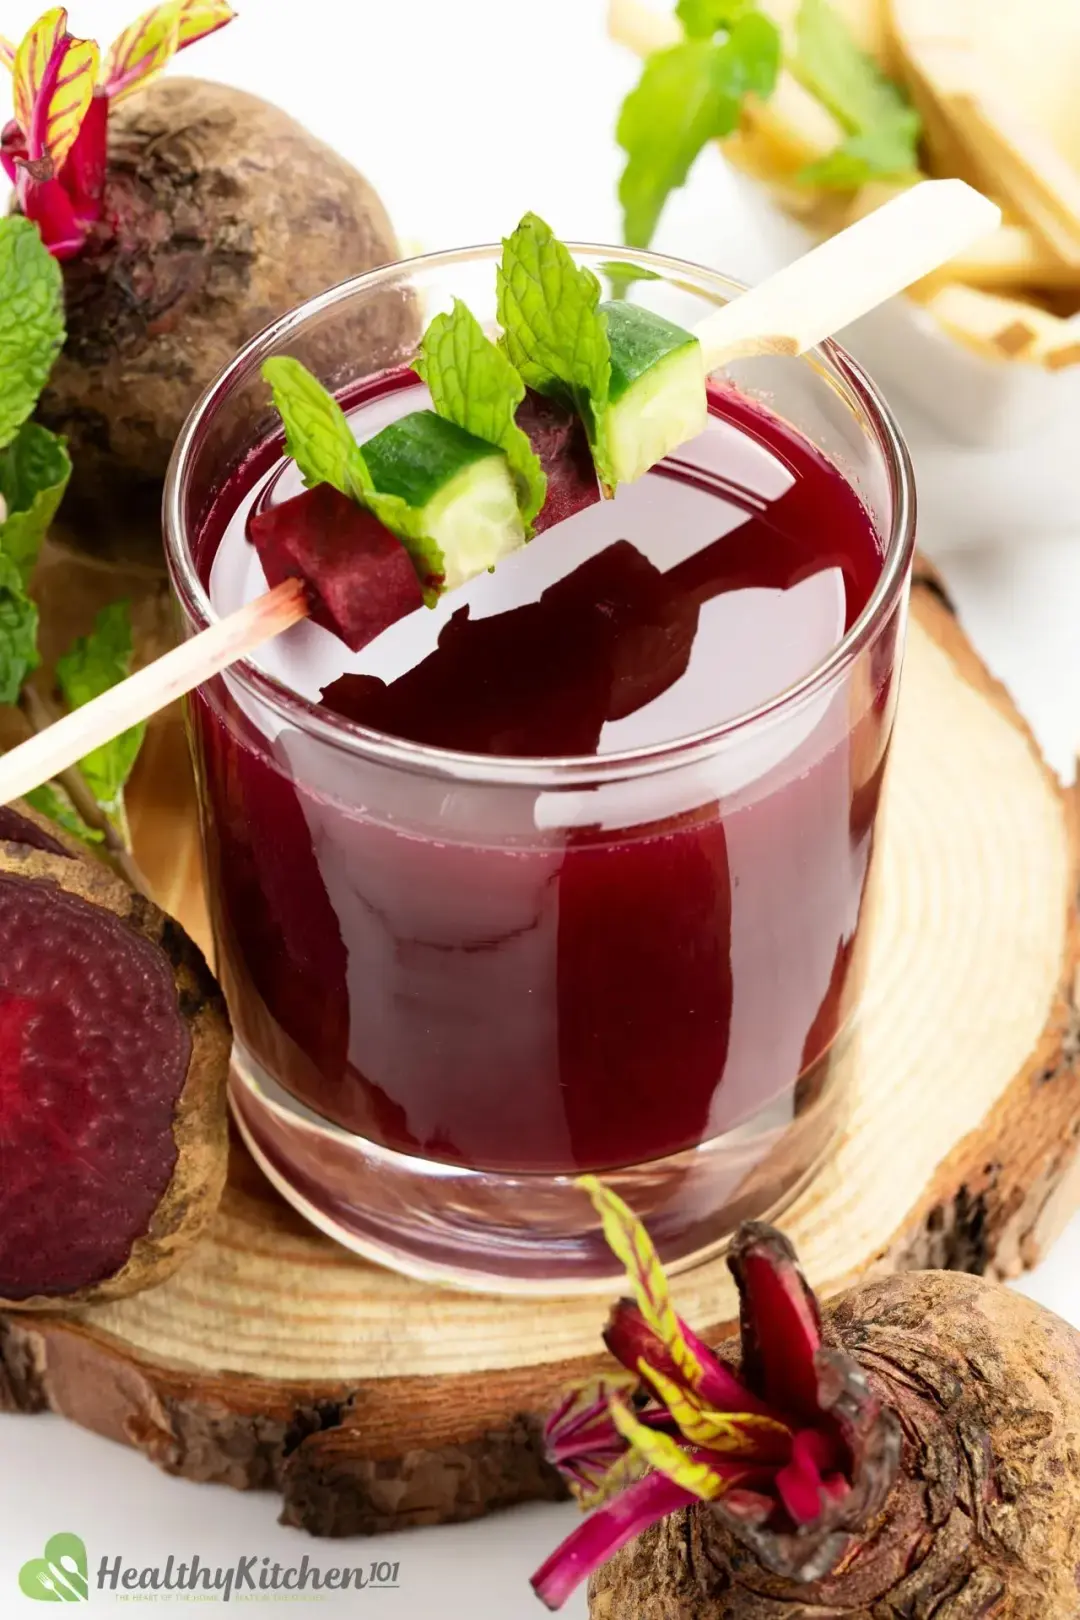 A short glass of beetroot juice topped with a skewer of cubed cucumber, beetroot, and mint leaves, next to whole beetroots